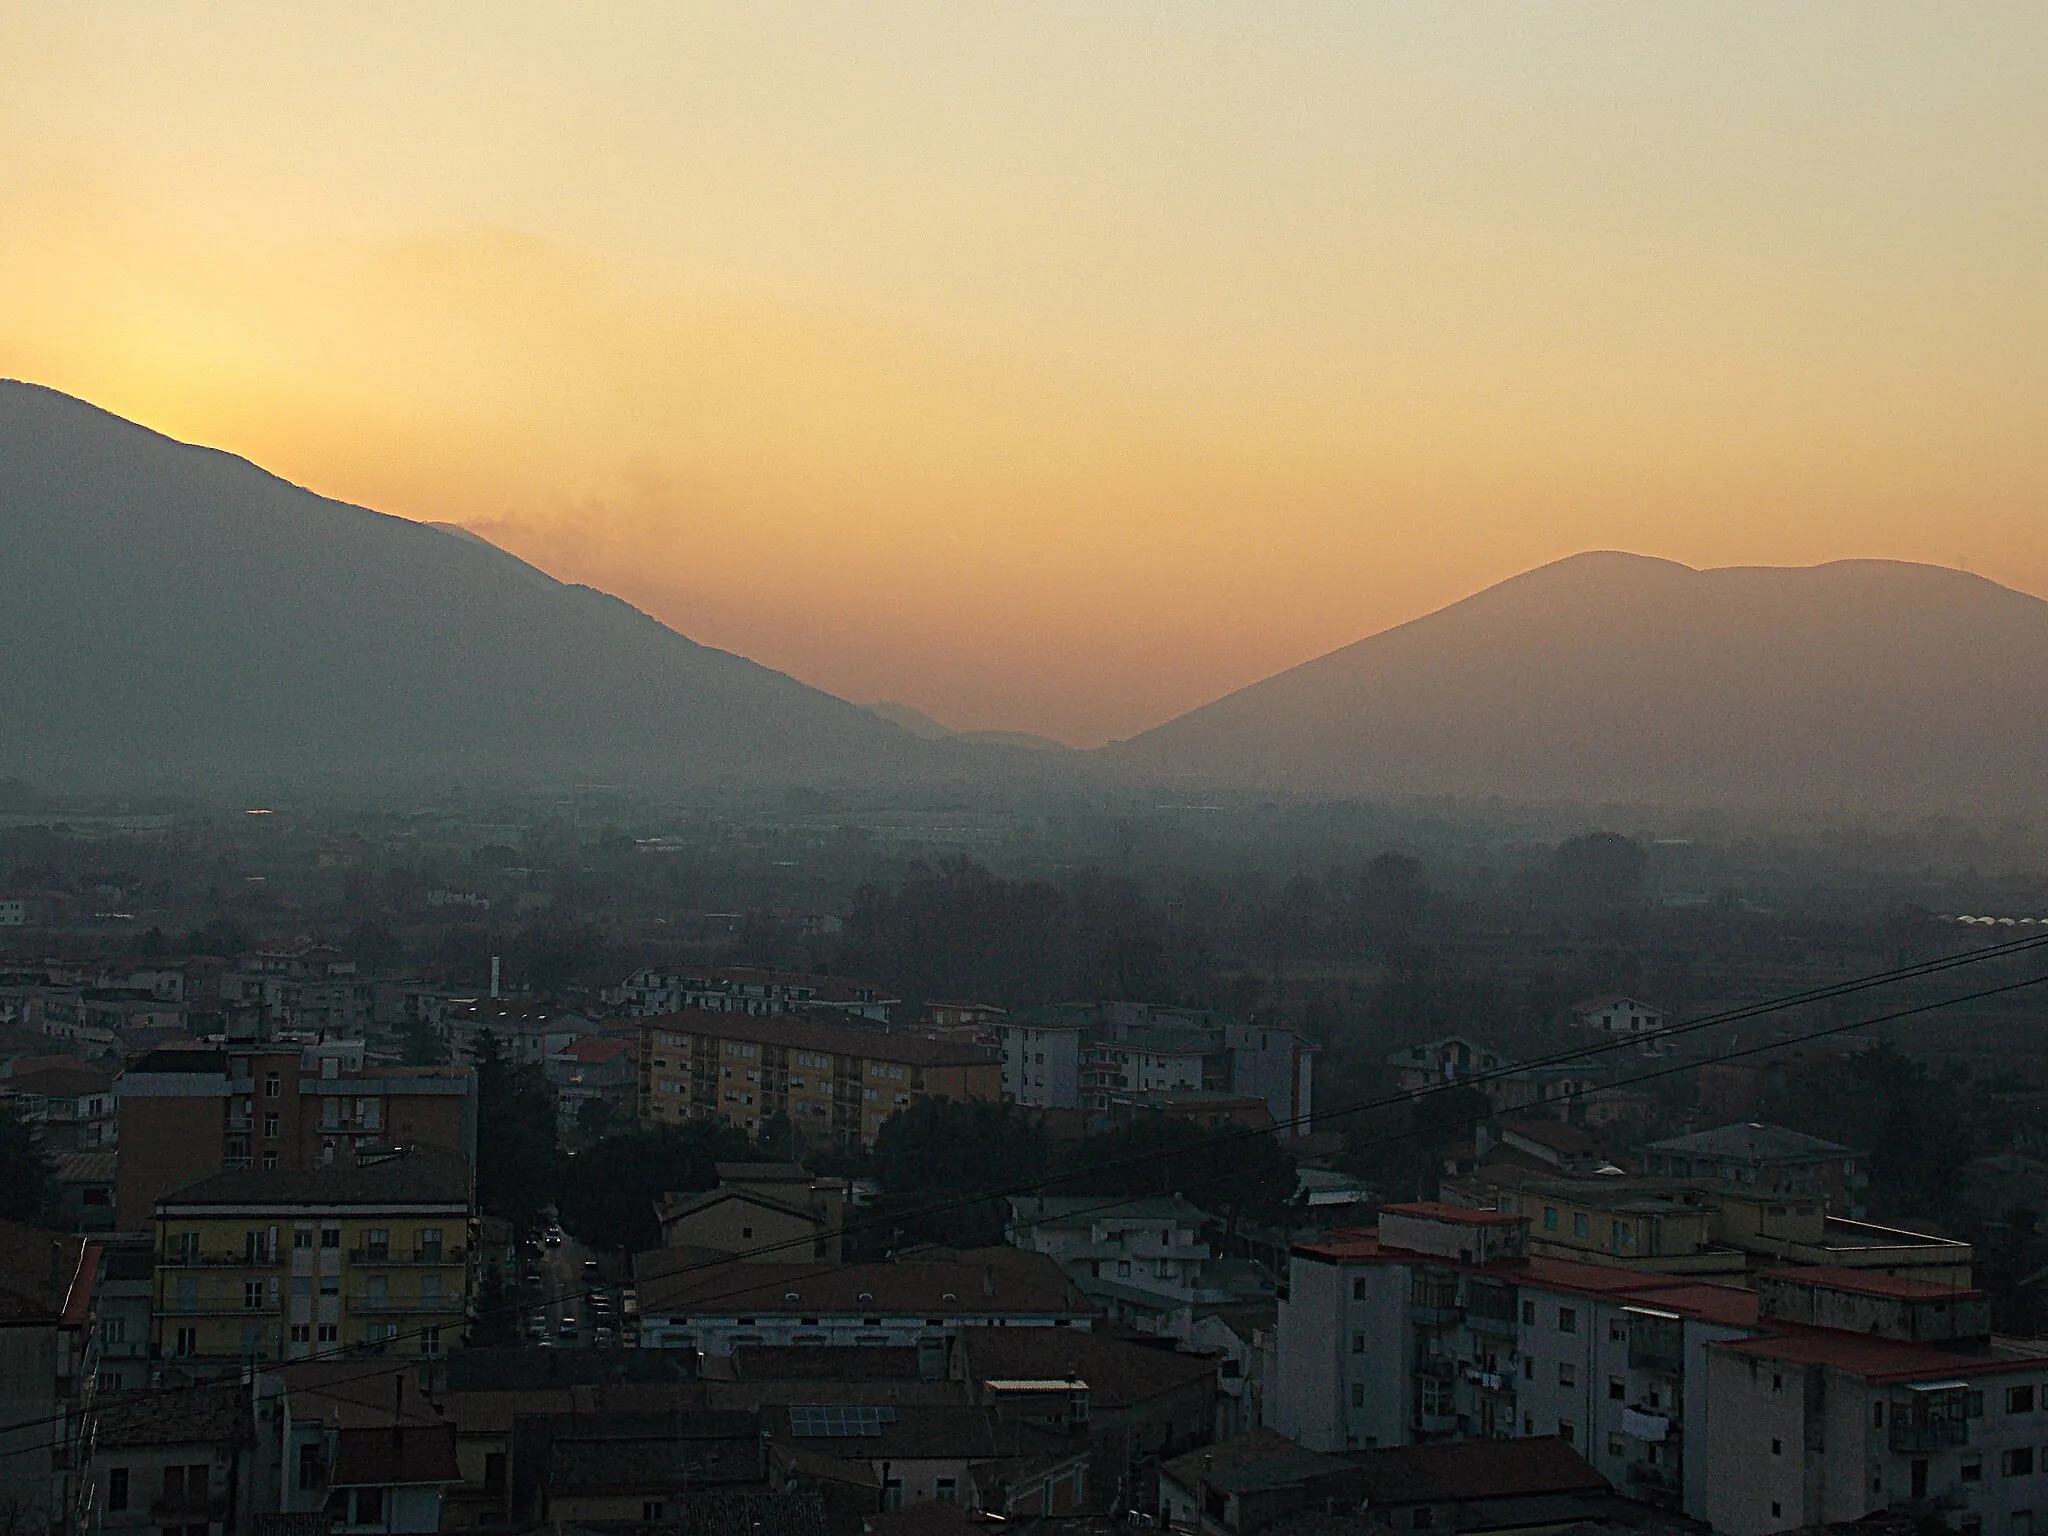 Photo showing: The Stretta di Arpaia ('Saddle of Arpaia'), traditionally believed to be the place of the yoke under which Romans were forced to pass at the Caudine Forks, seen from the Montesarchio hill at sunset. The mount on the left is Paraturo, the one on the right is Tairano.